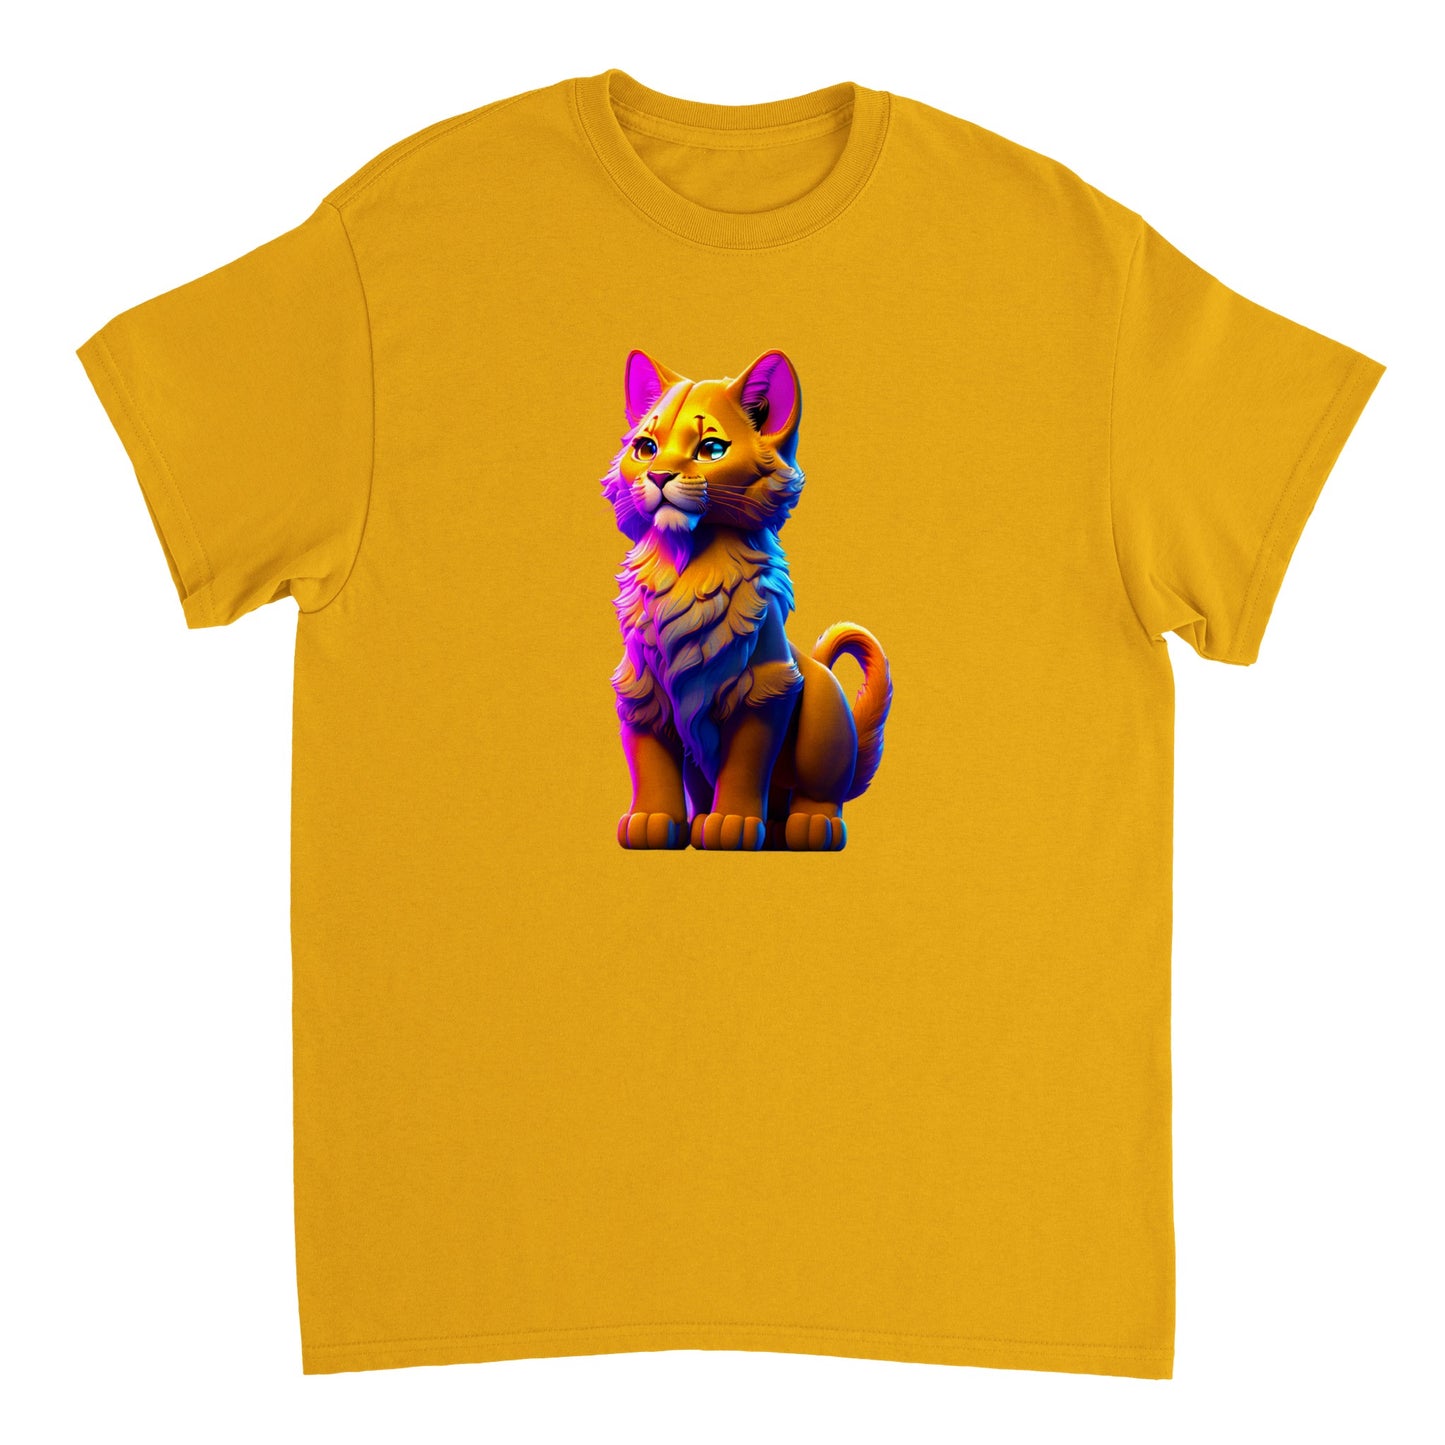 Adorable, Cool, Cute Cats and Kittens Toy - Heavyweight Unisex Crewneck T-shirt 50